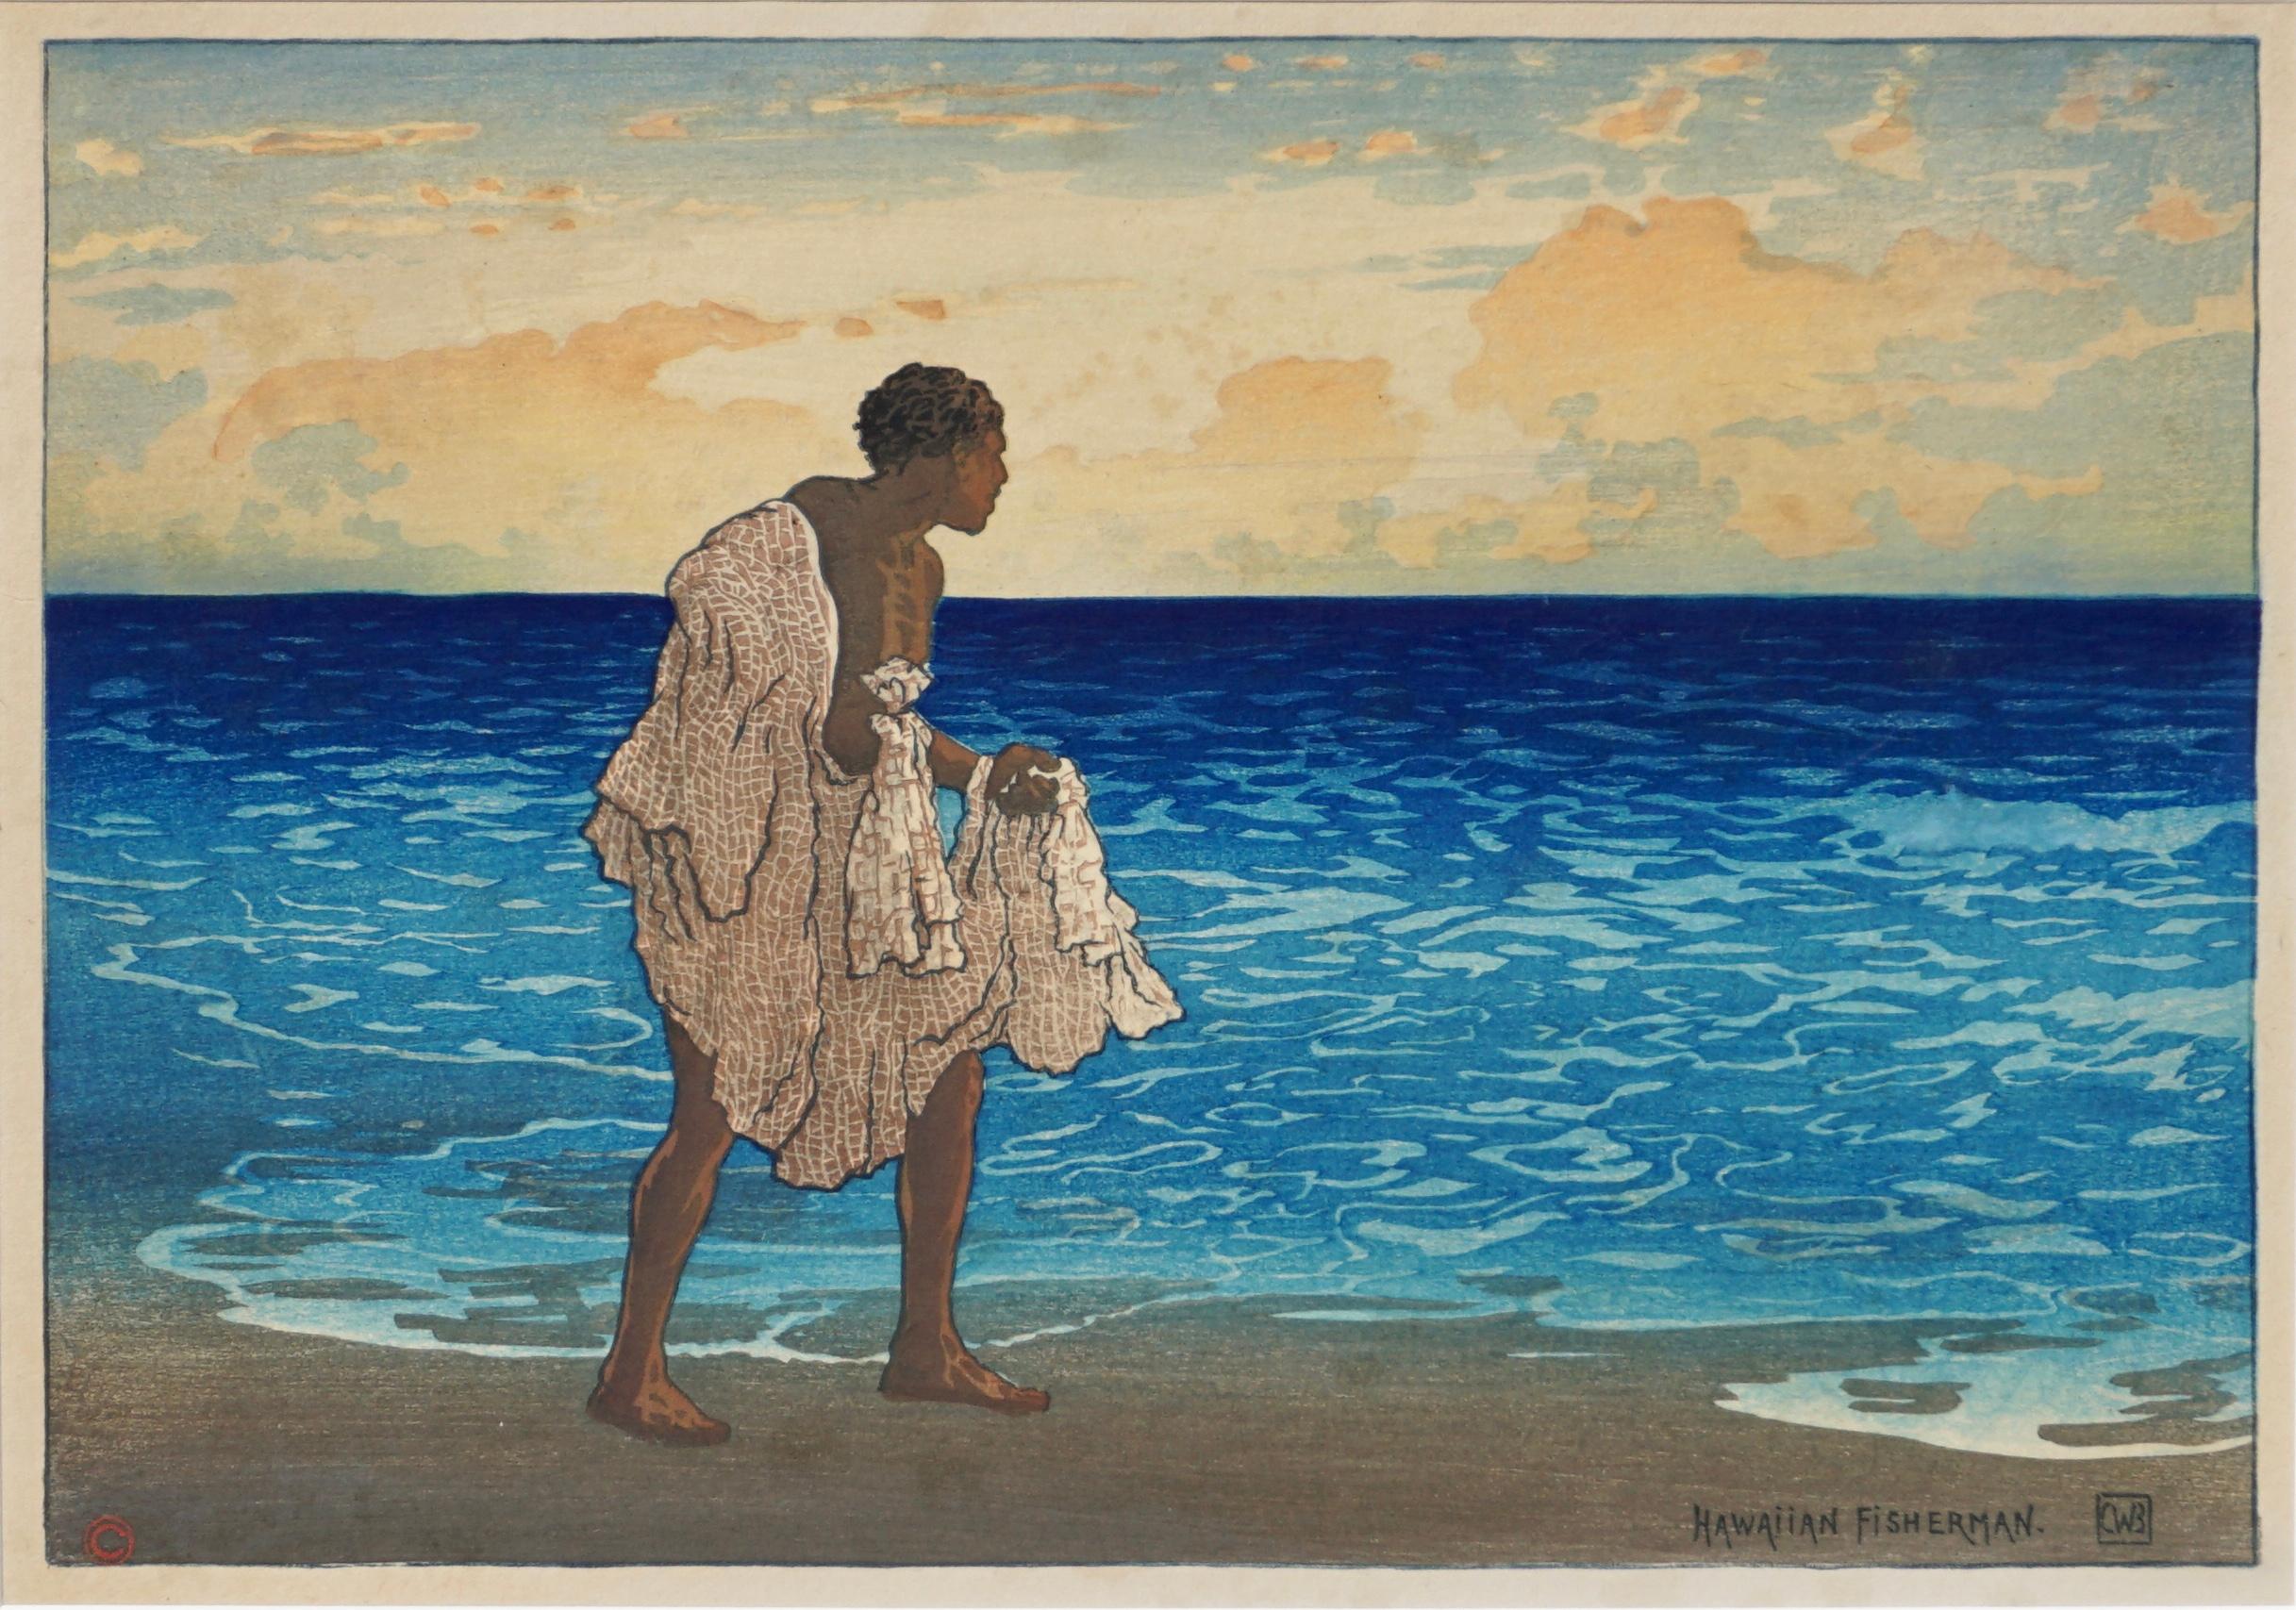 Hawaiian fisherman by Charles William Bartlett, 1919
Color woodcut block print on wove paper.
Beautiful Art Nouveau - Art Deco Hawaiian decor with vibrant colors. 

Measures: Print 15 x 11 Inches 
Framed 21.75 x 17.75 Inches

Signed red